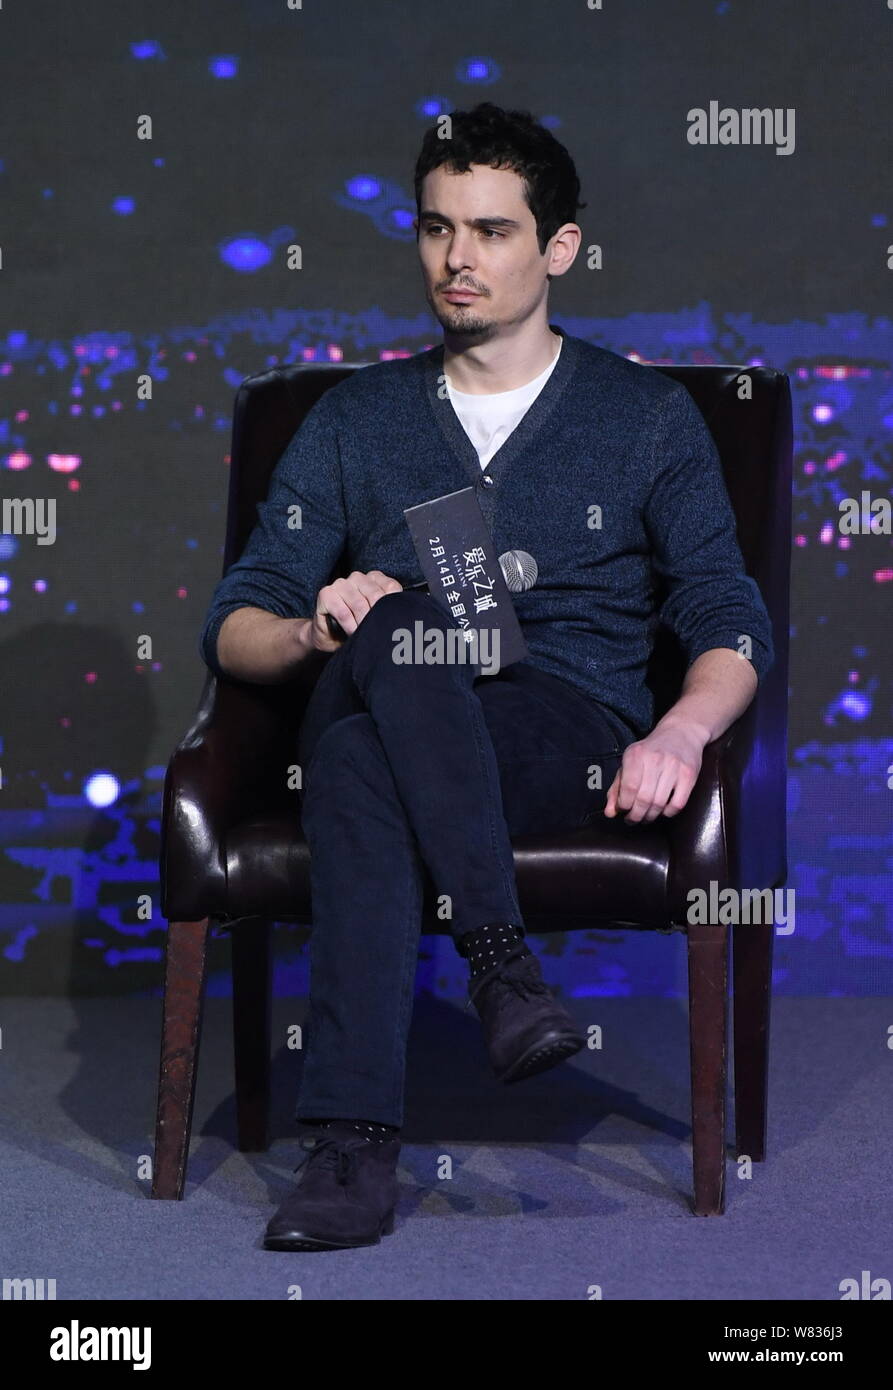 American director Damien Chazelle attends a premiere for his movie 'La La Land' in Beijing, China, 24 January 2017. Stock Photo